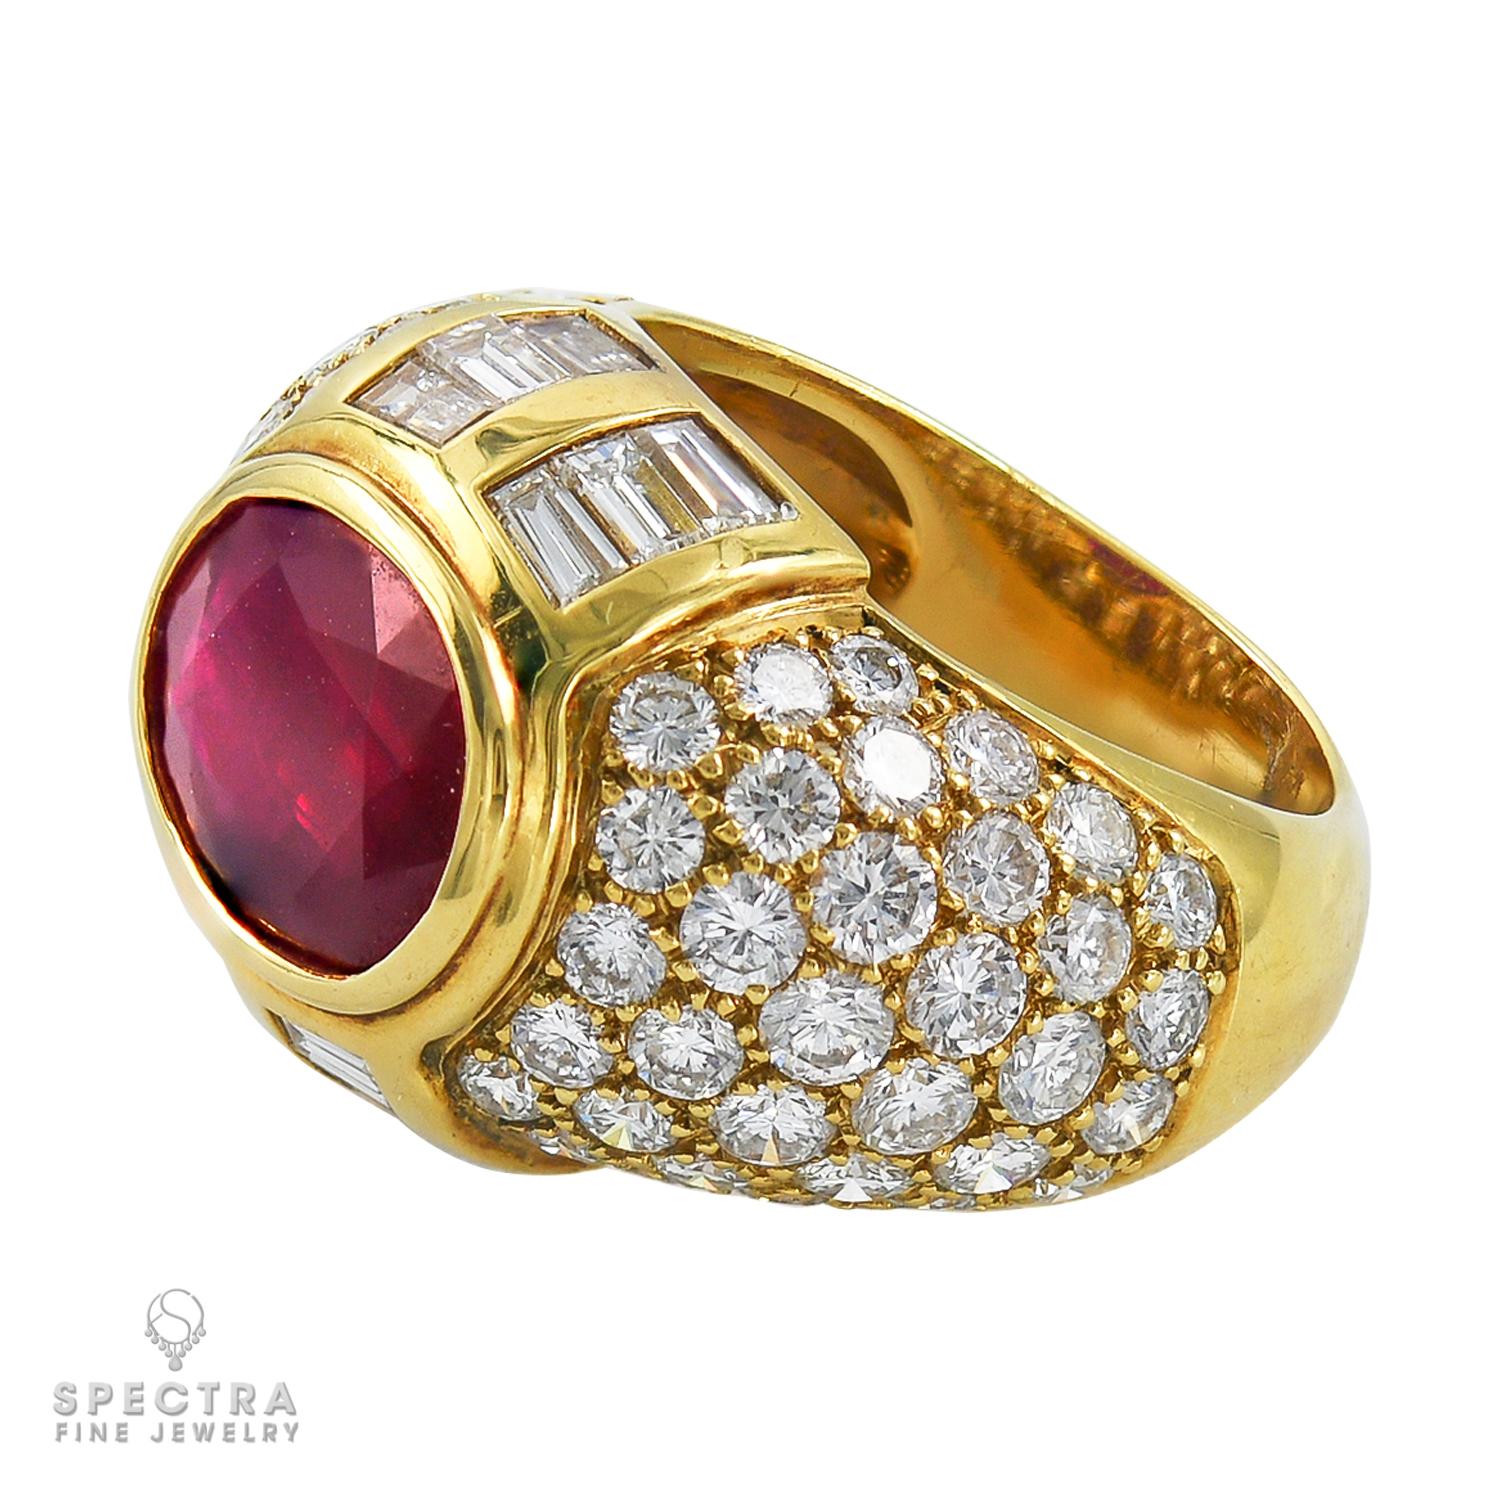 This exquisite ring boasts a stunning 4.0-carat oval ruby at its center, certified by GRS as originating from Burma and having undergone heat treatment to enhance its natural beauty. The ruby is surrounded by 2.50 carats of round brilliant diamonds